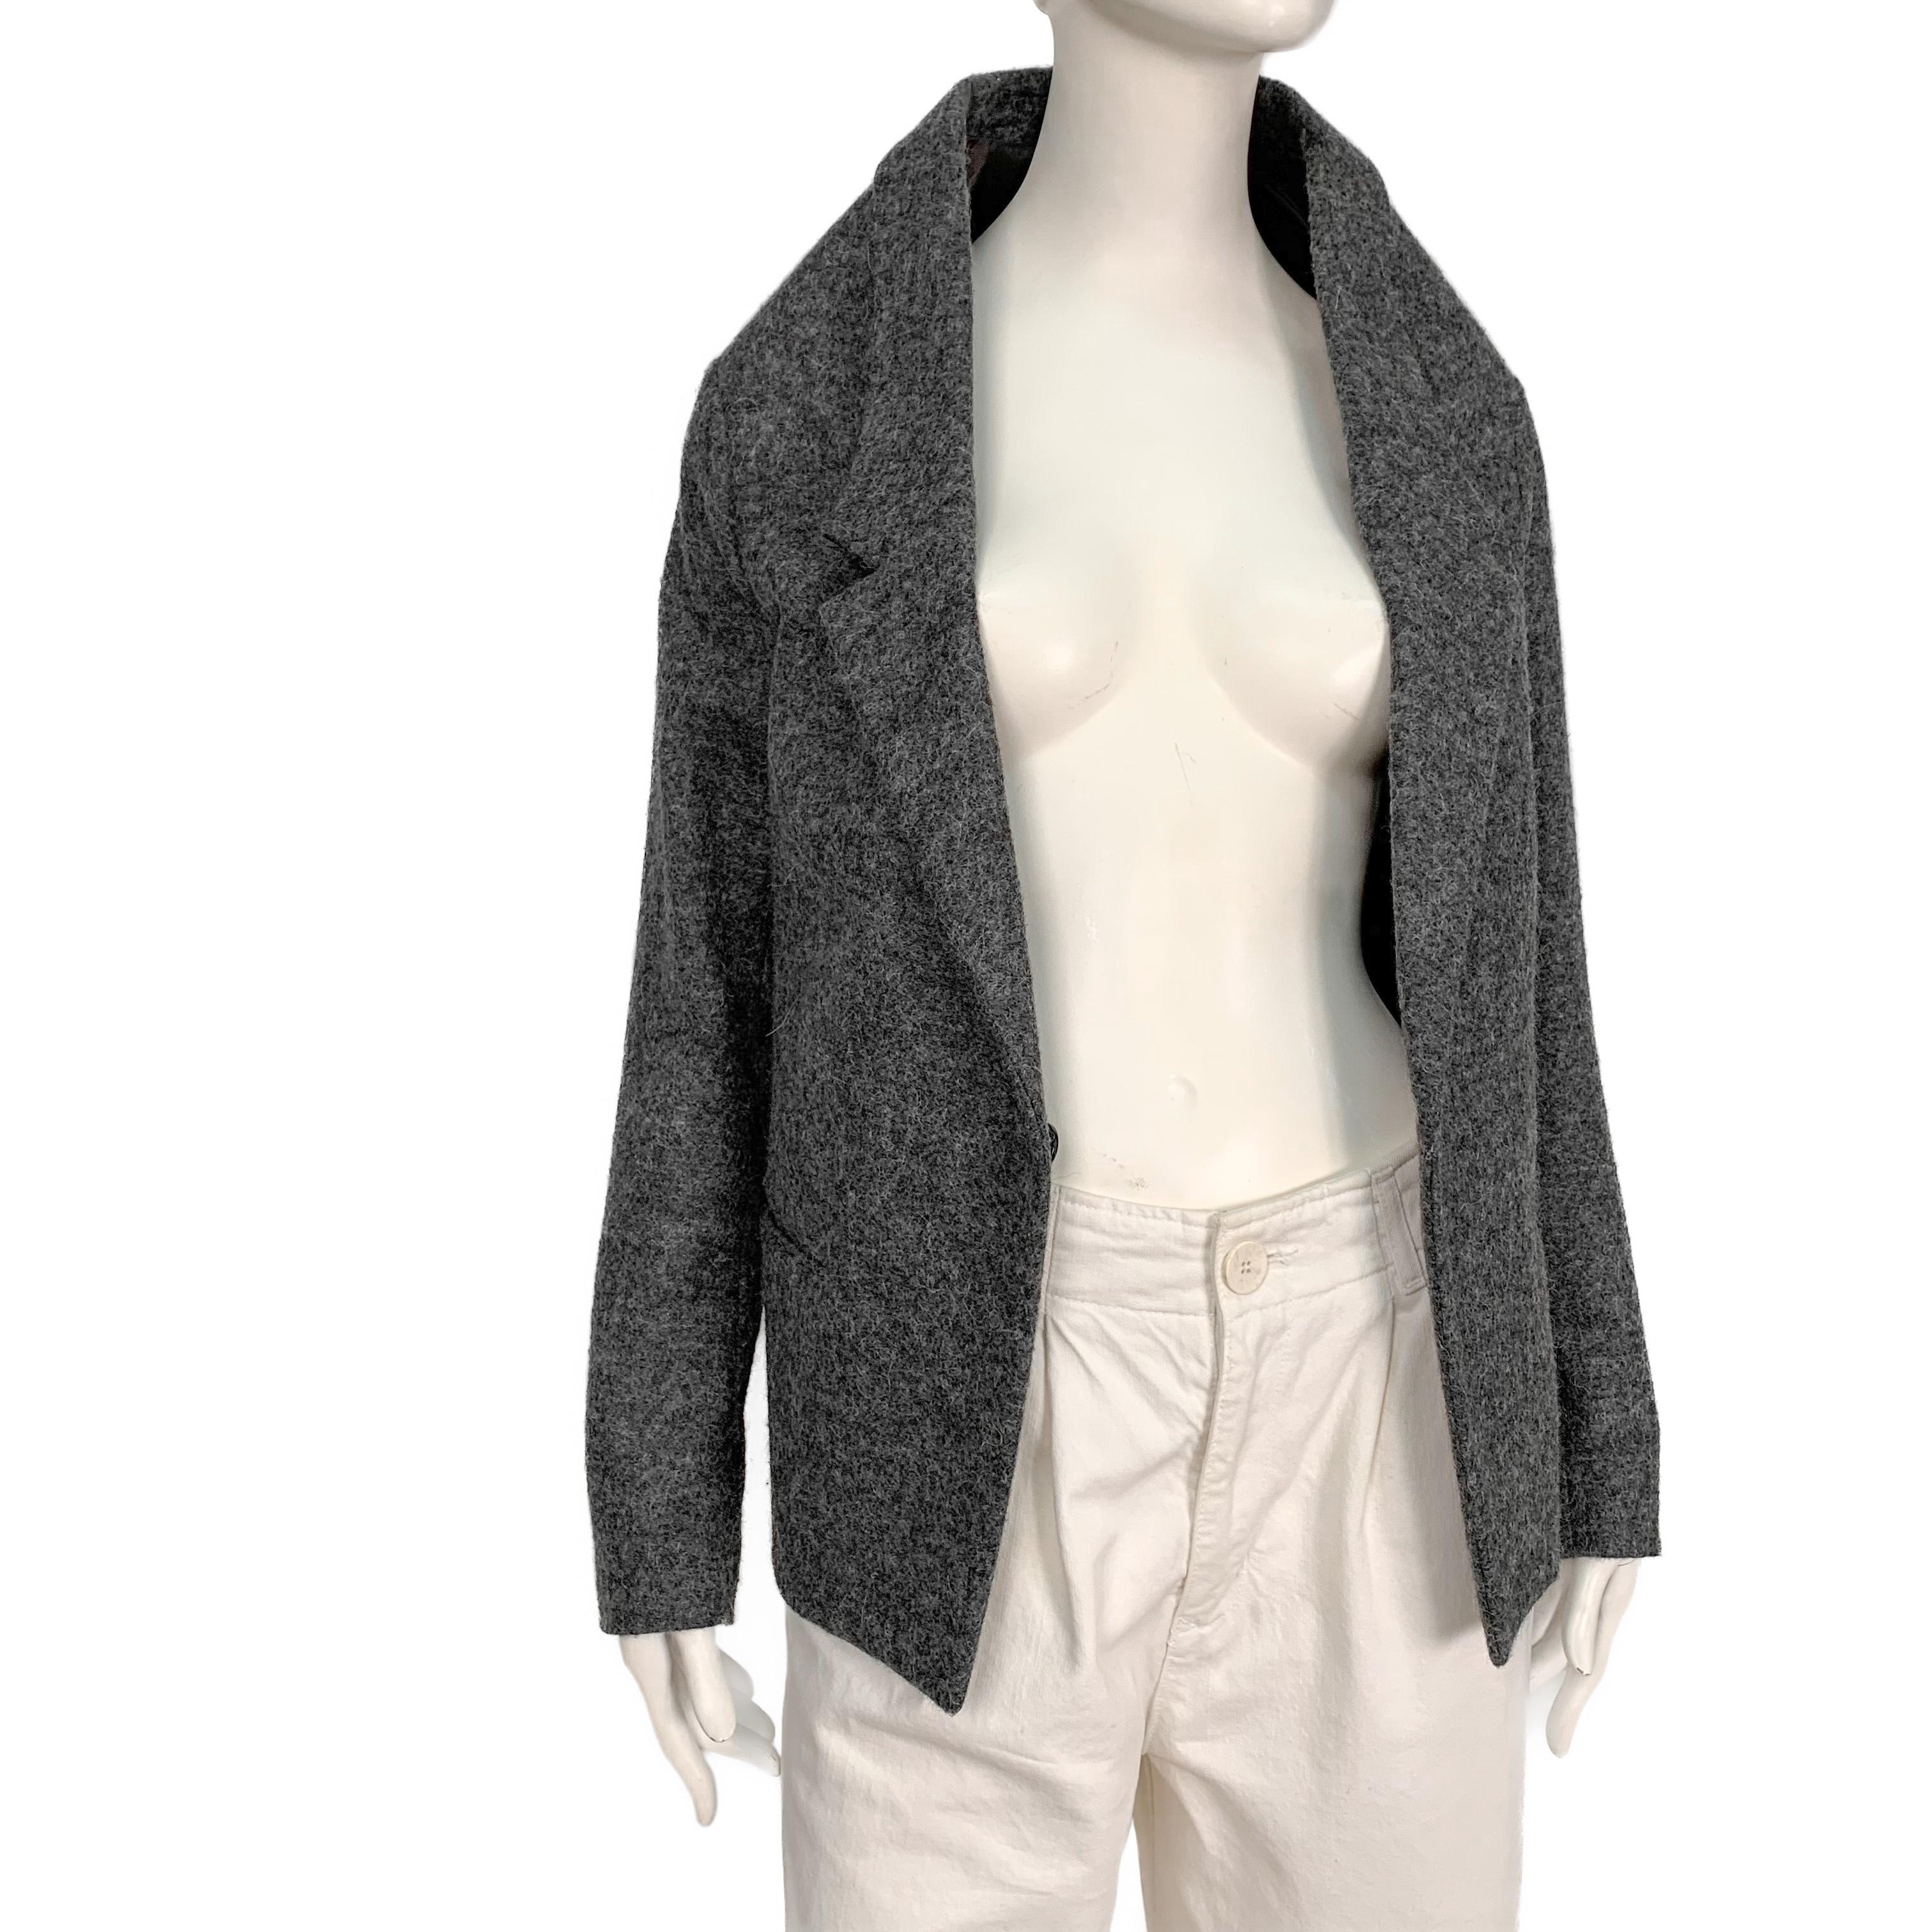 AW 2010 mr. Margiela's last RTW collection grey wool deconstructed blazer For Sale 1